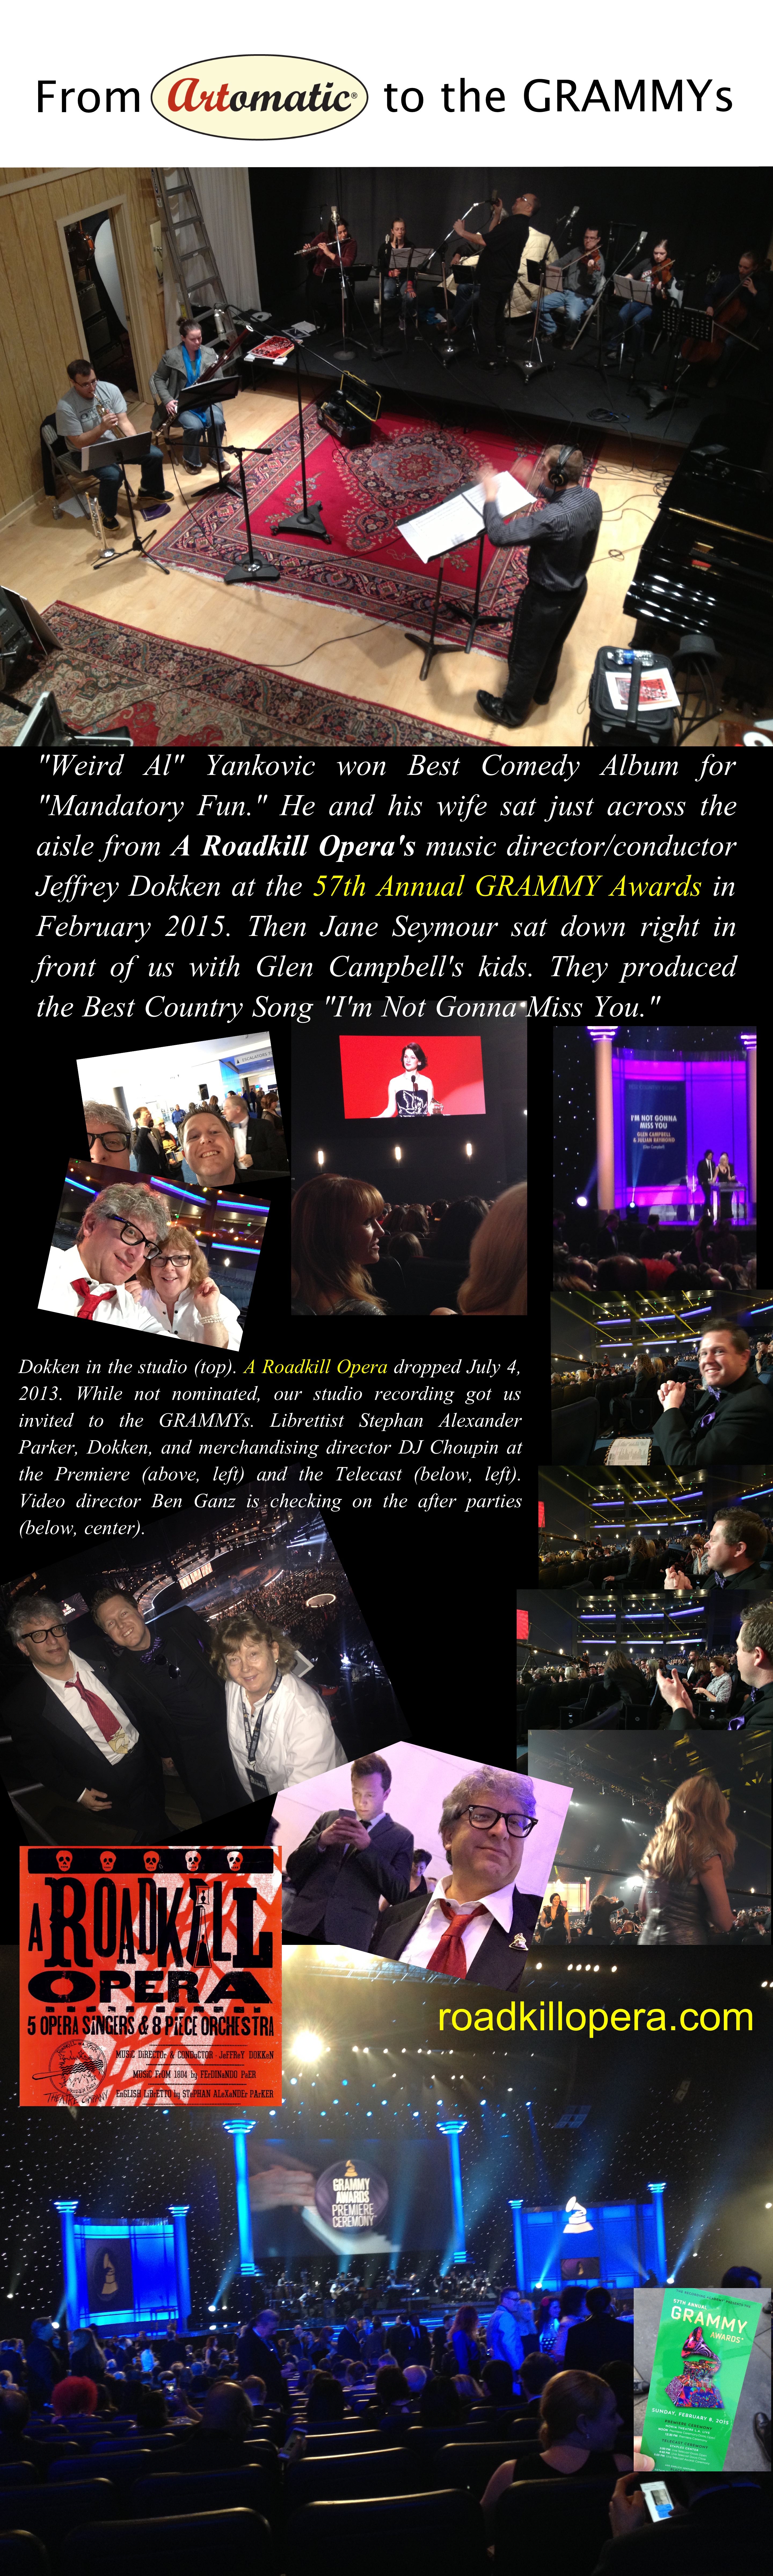 24 inch by 80 inch banner with photos of "Weird Al" Yankovich, Jane Seymour, and A Roadkill Opera's entourage at the February 2015 GRAMMYs